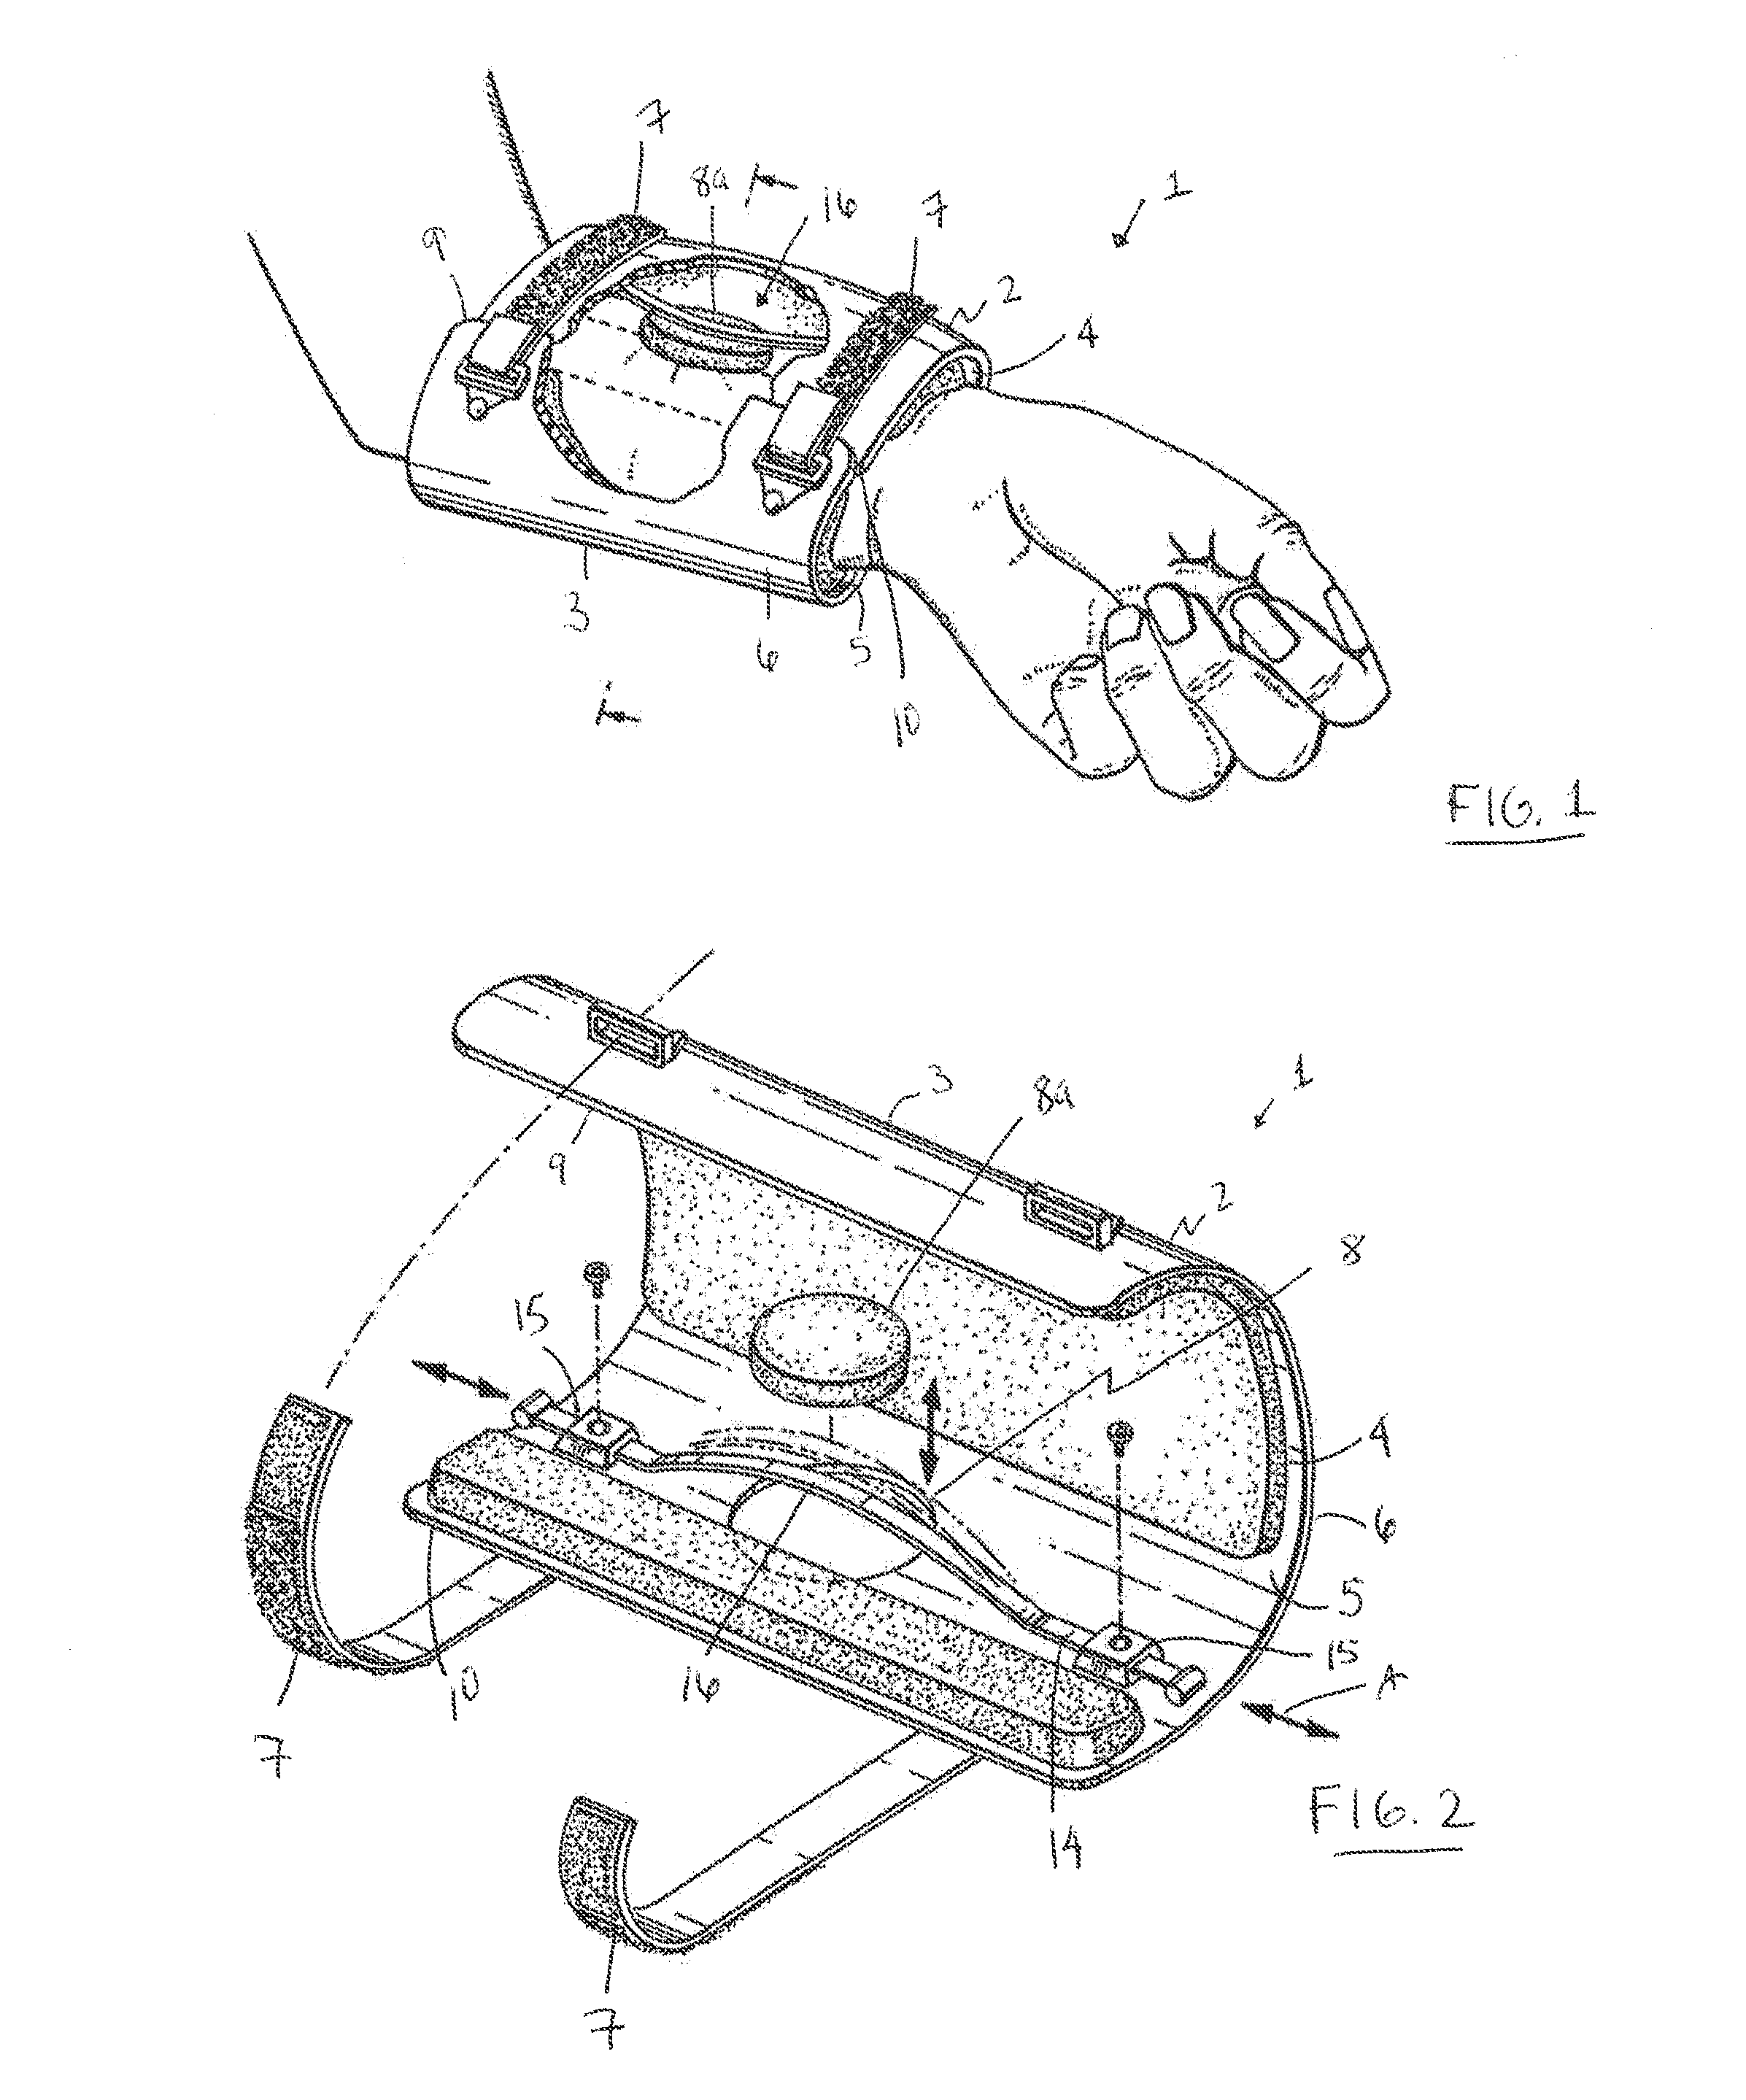 Orthopaedic device and method of use for treating bone fractures